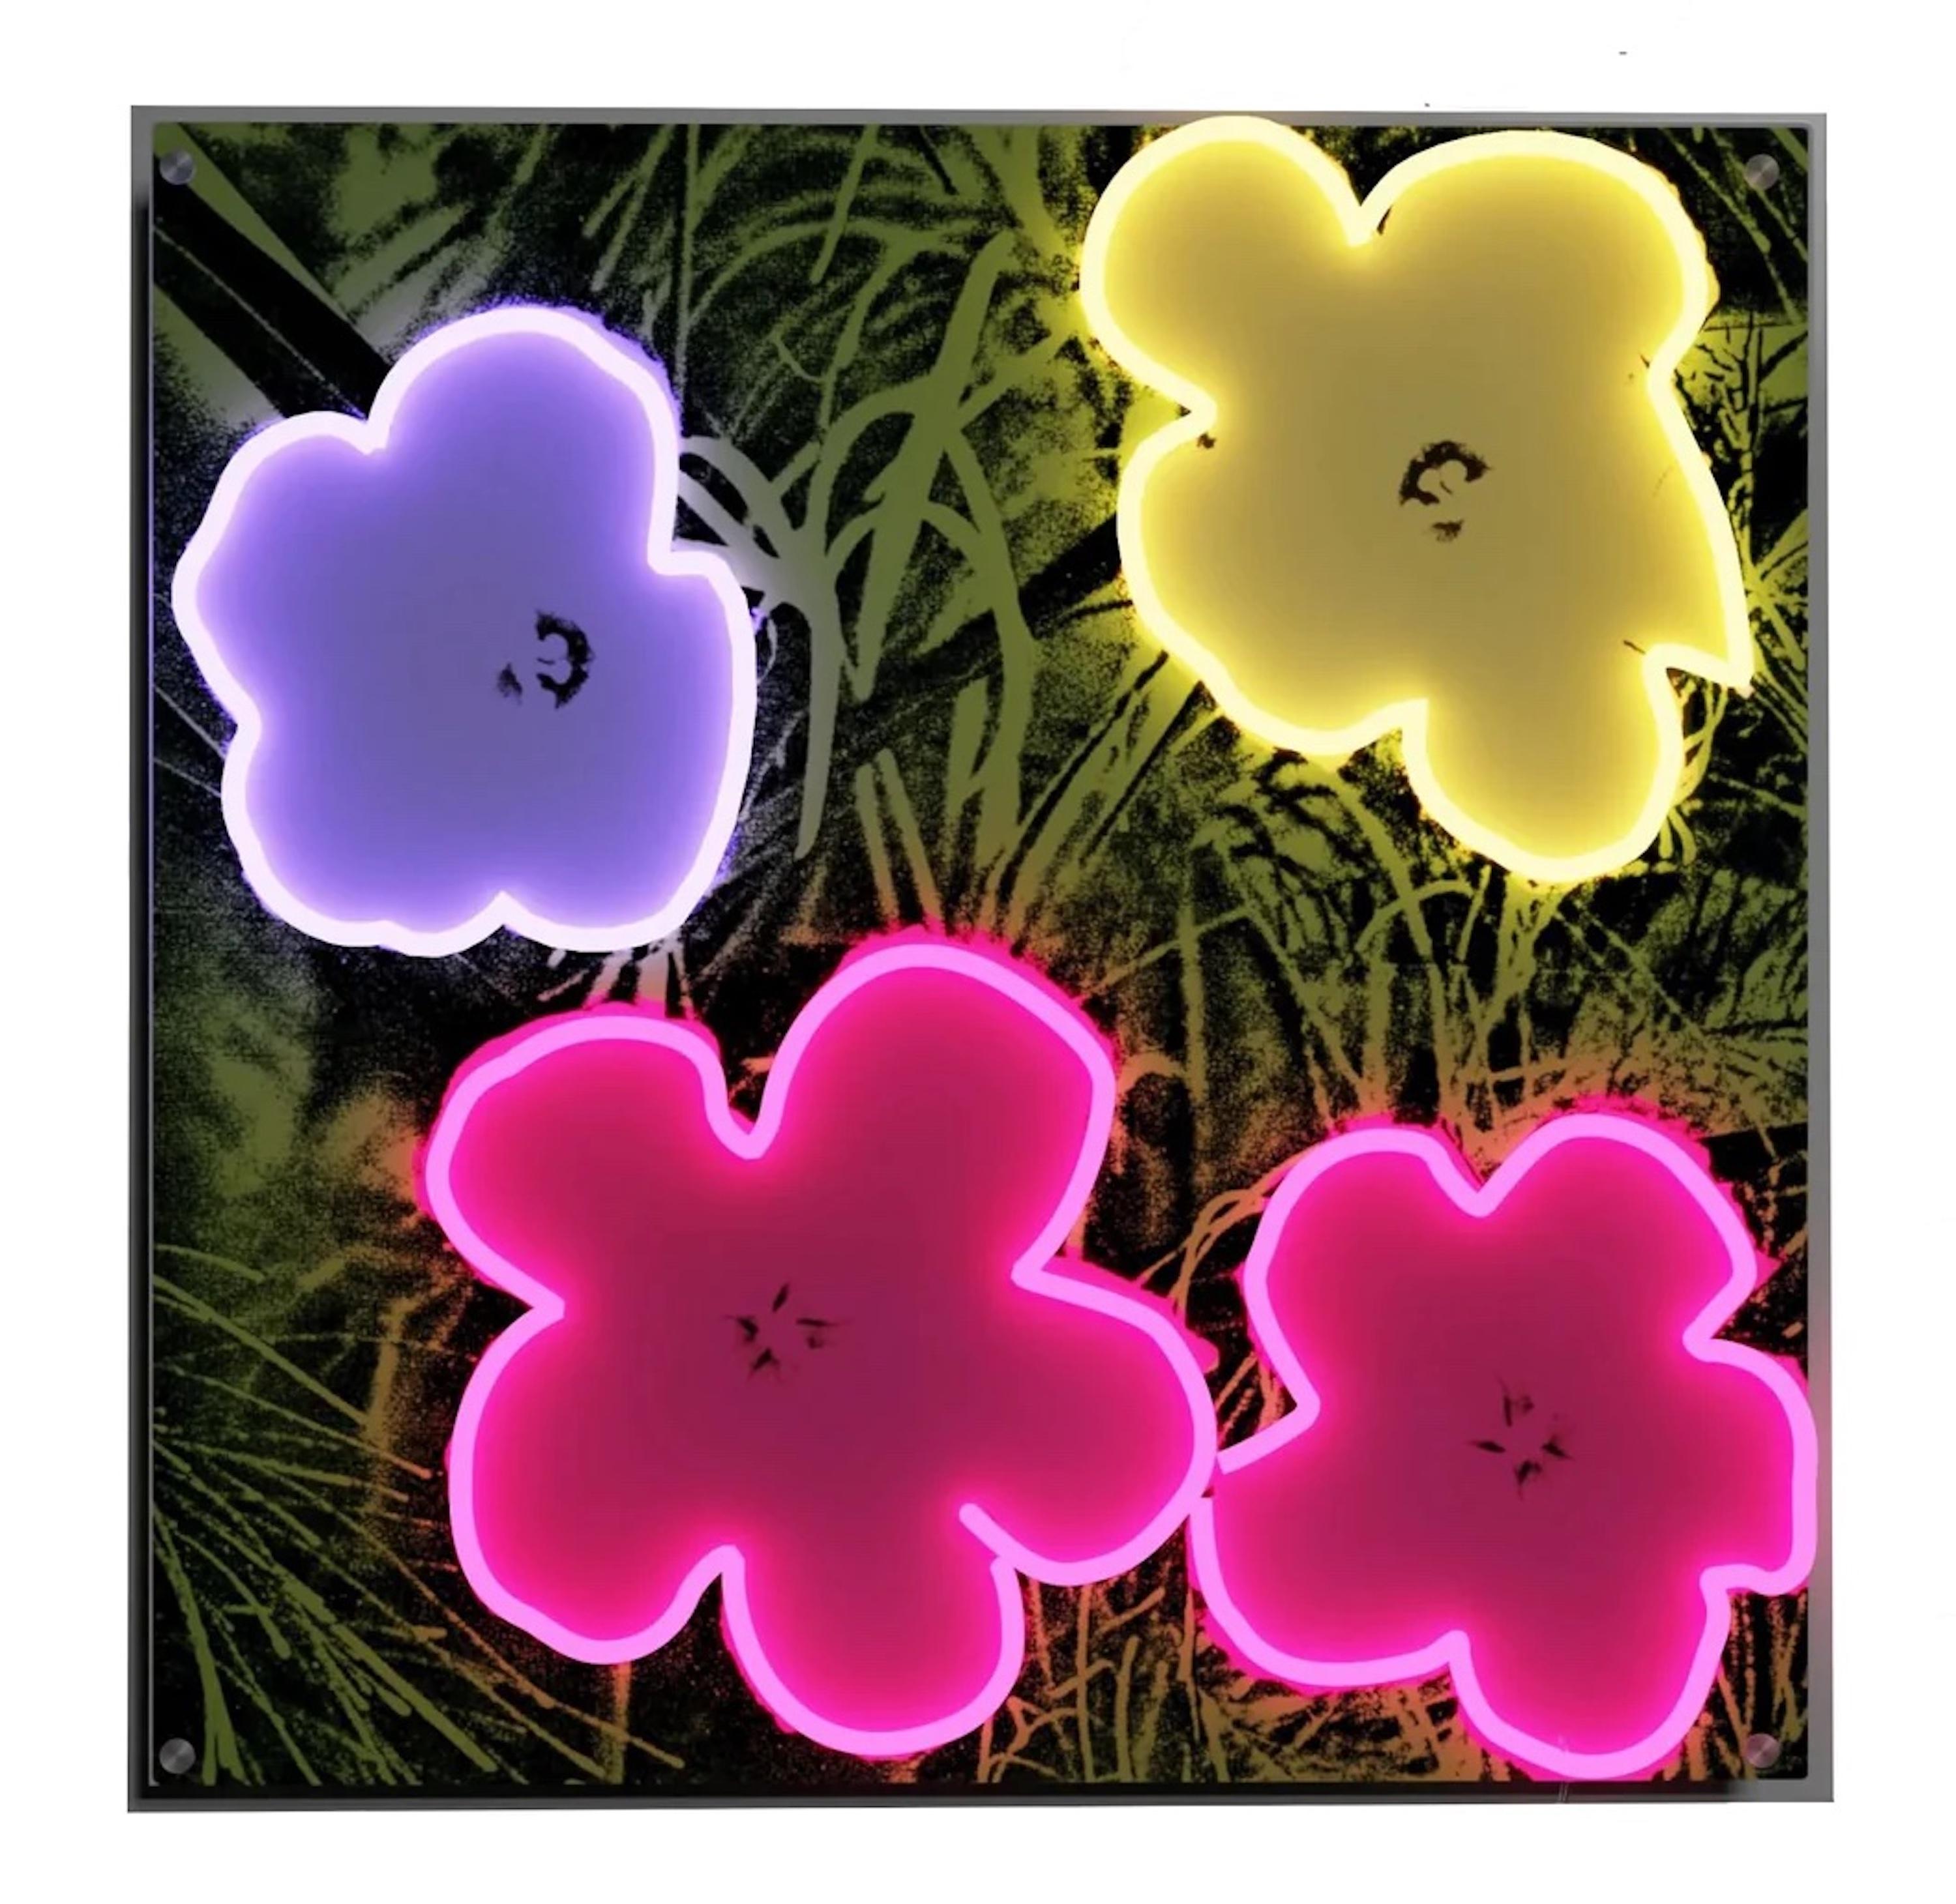 Neon Flowers lighted Wall Hanging/Sign - Mixed Media Art by Andy Warhol